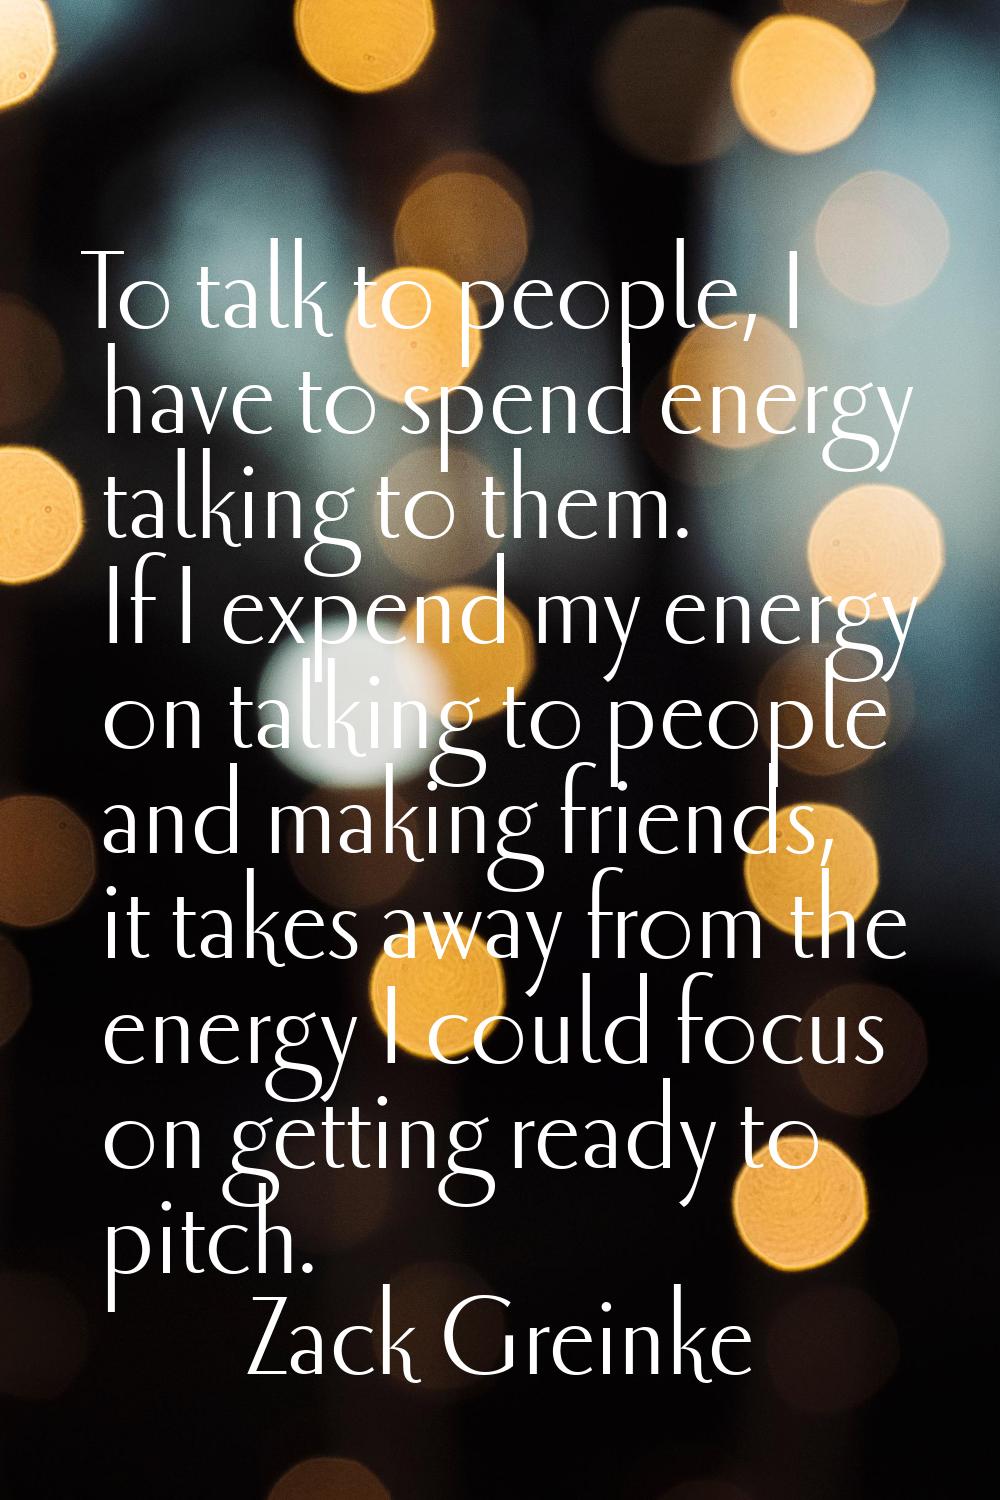 To talk to people, I have to spend energy talking to them. If I expend my energy on talking to peop